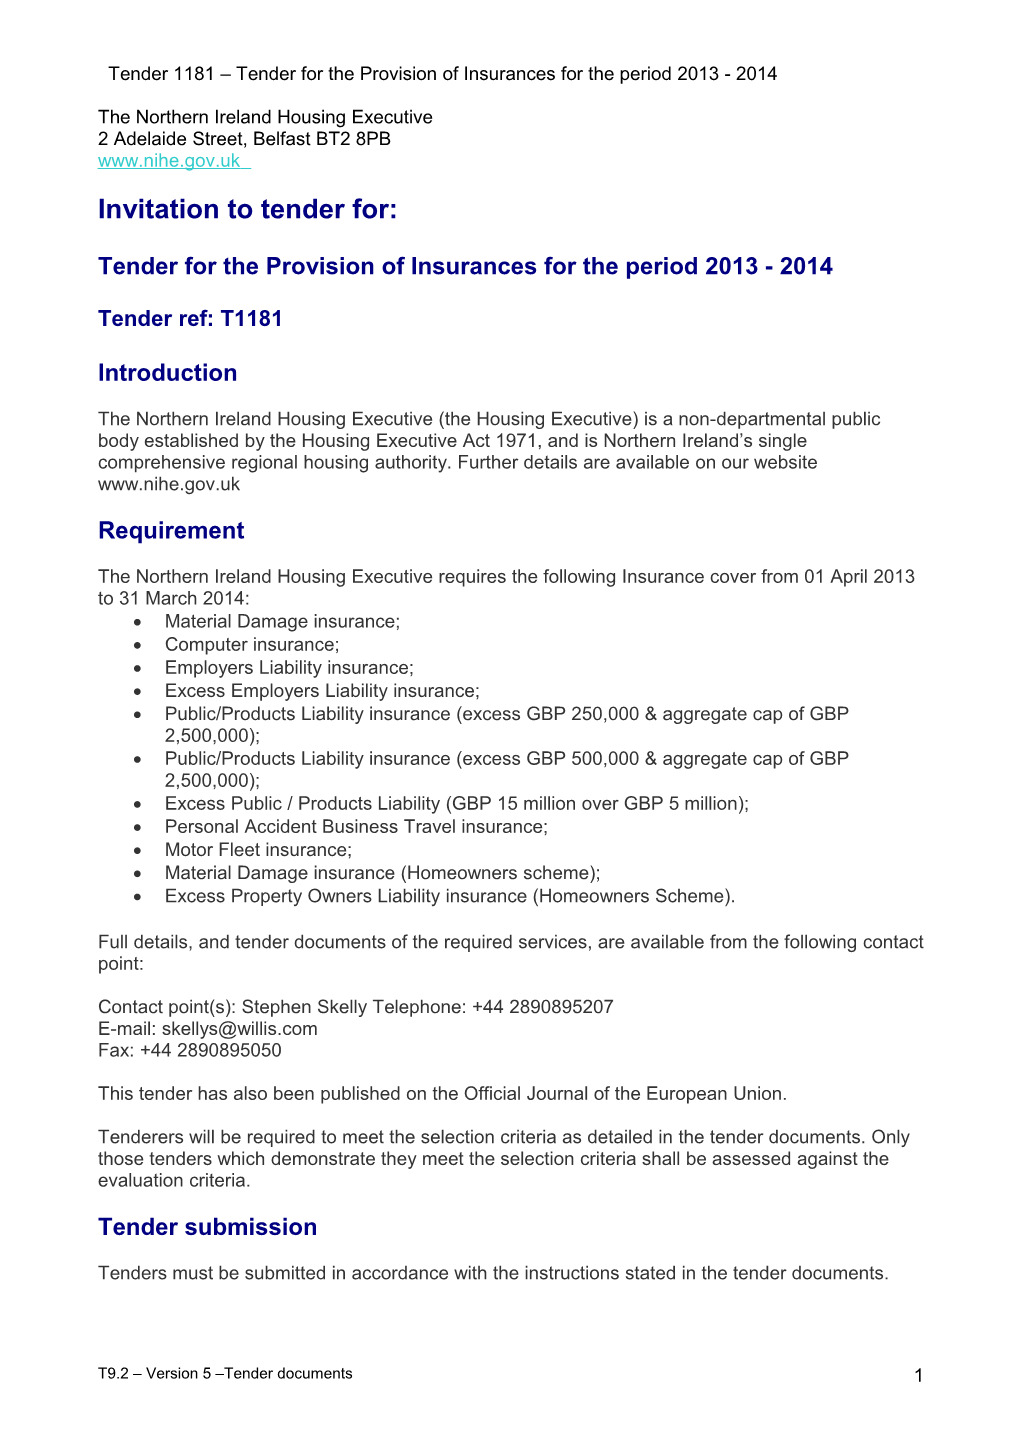 T1181 Tender for the Provision of Insurances for the Period 2013-2014